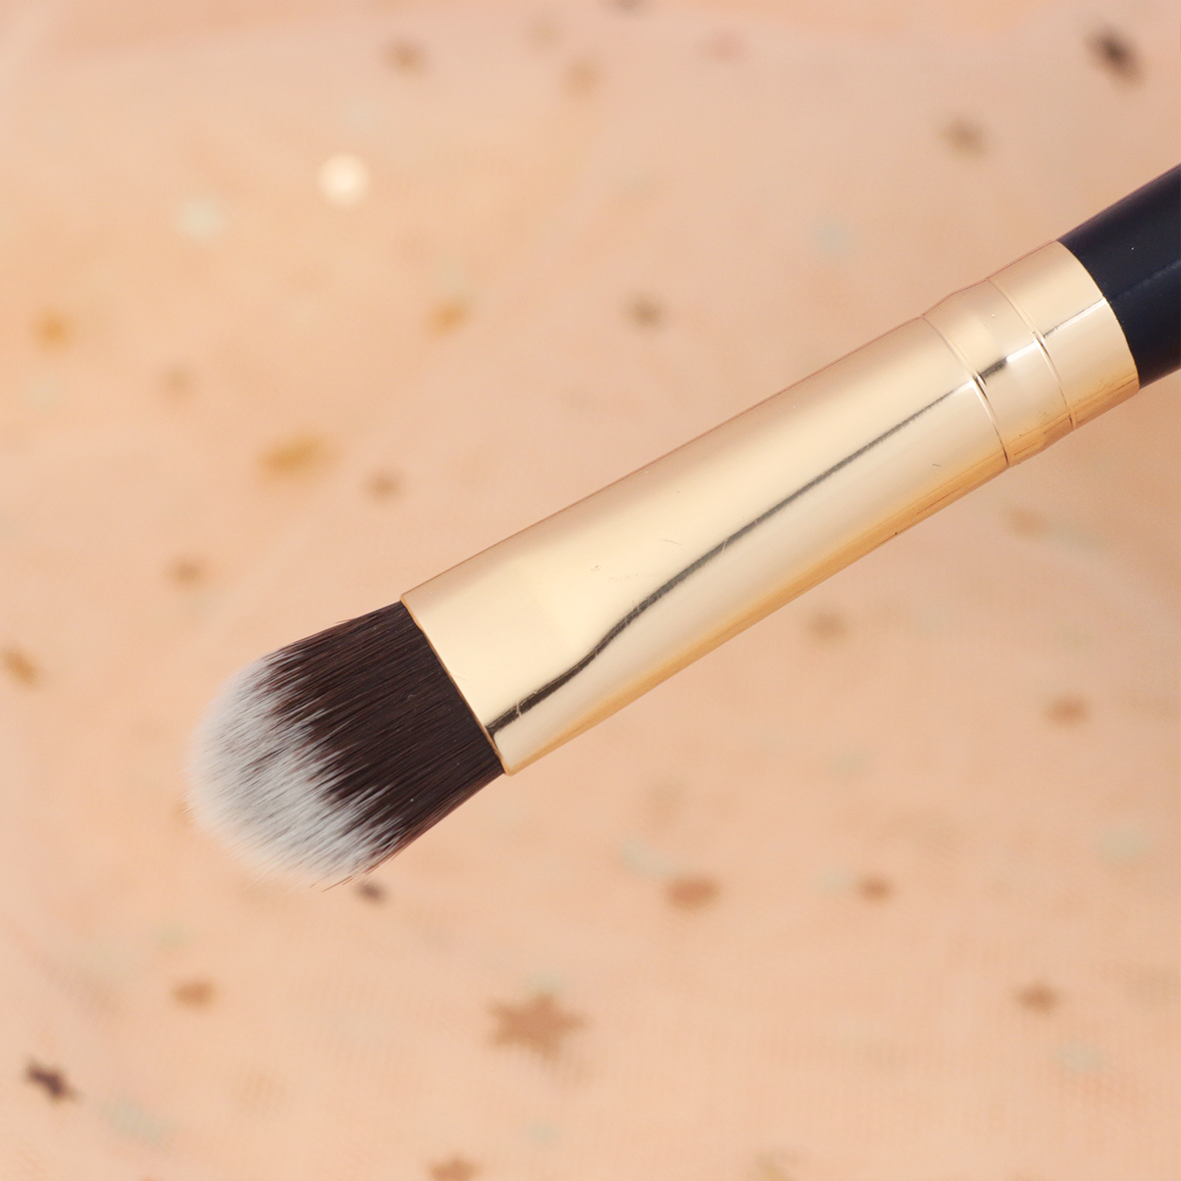 Paddle Concealer - 13rushes - Singapore's best makeup brushes